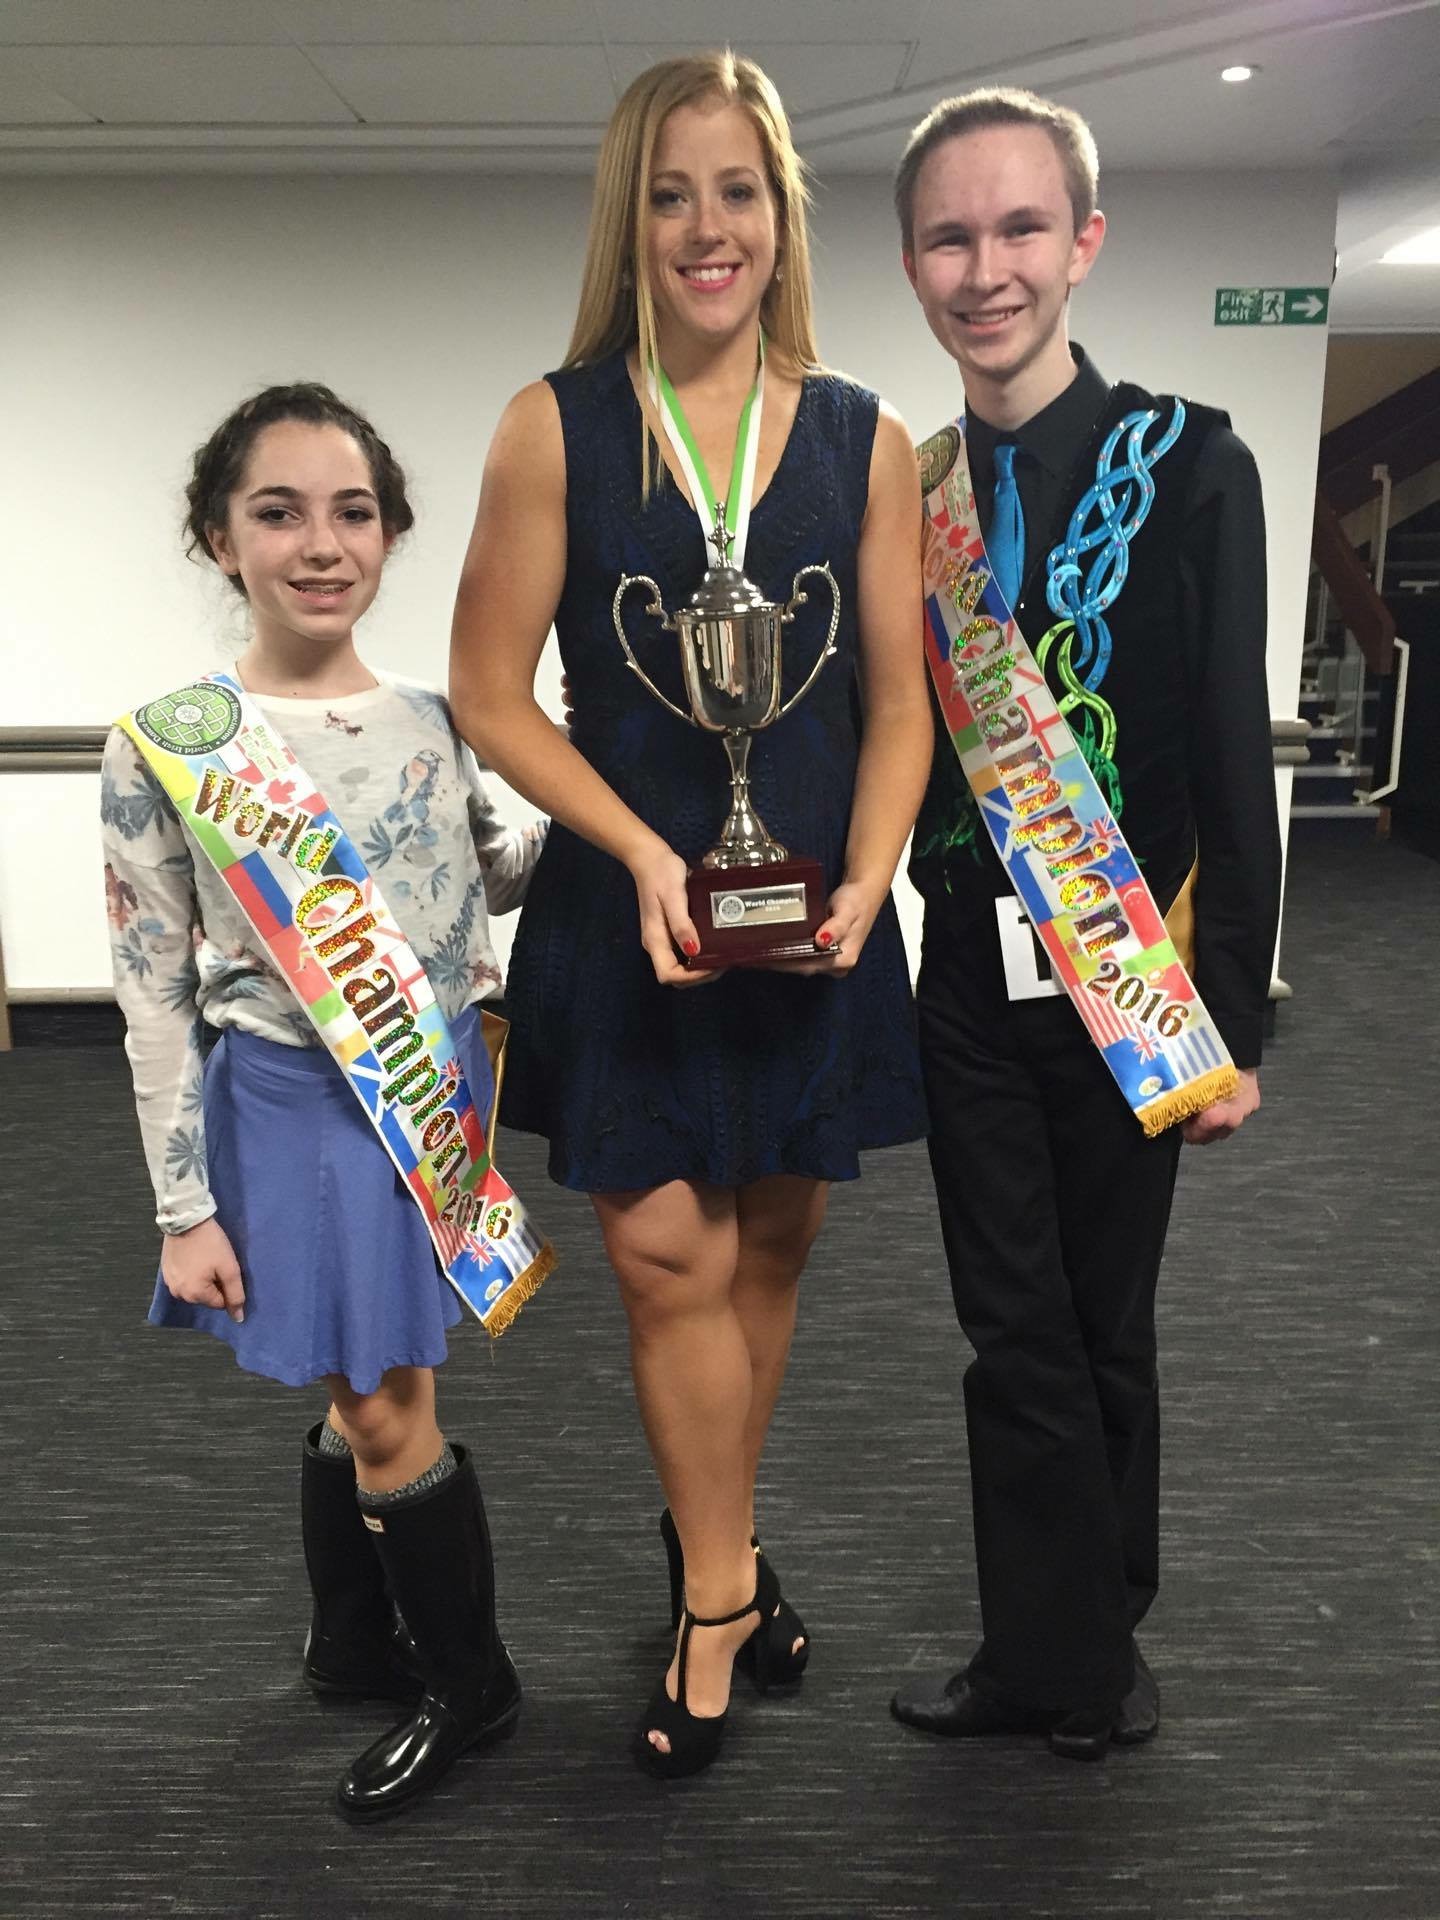 Angela Brunetti and Matthew Jones pose with their teacher, Kate O'Brien, after both winning the 2016 WIDA World Championships